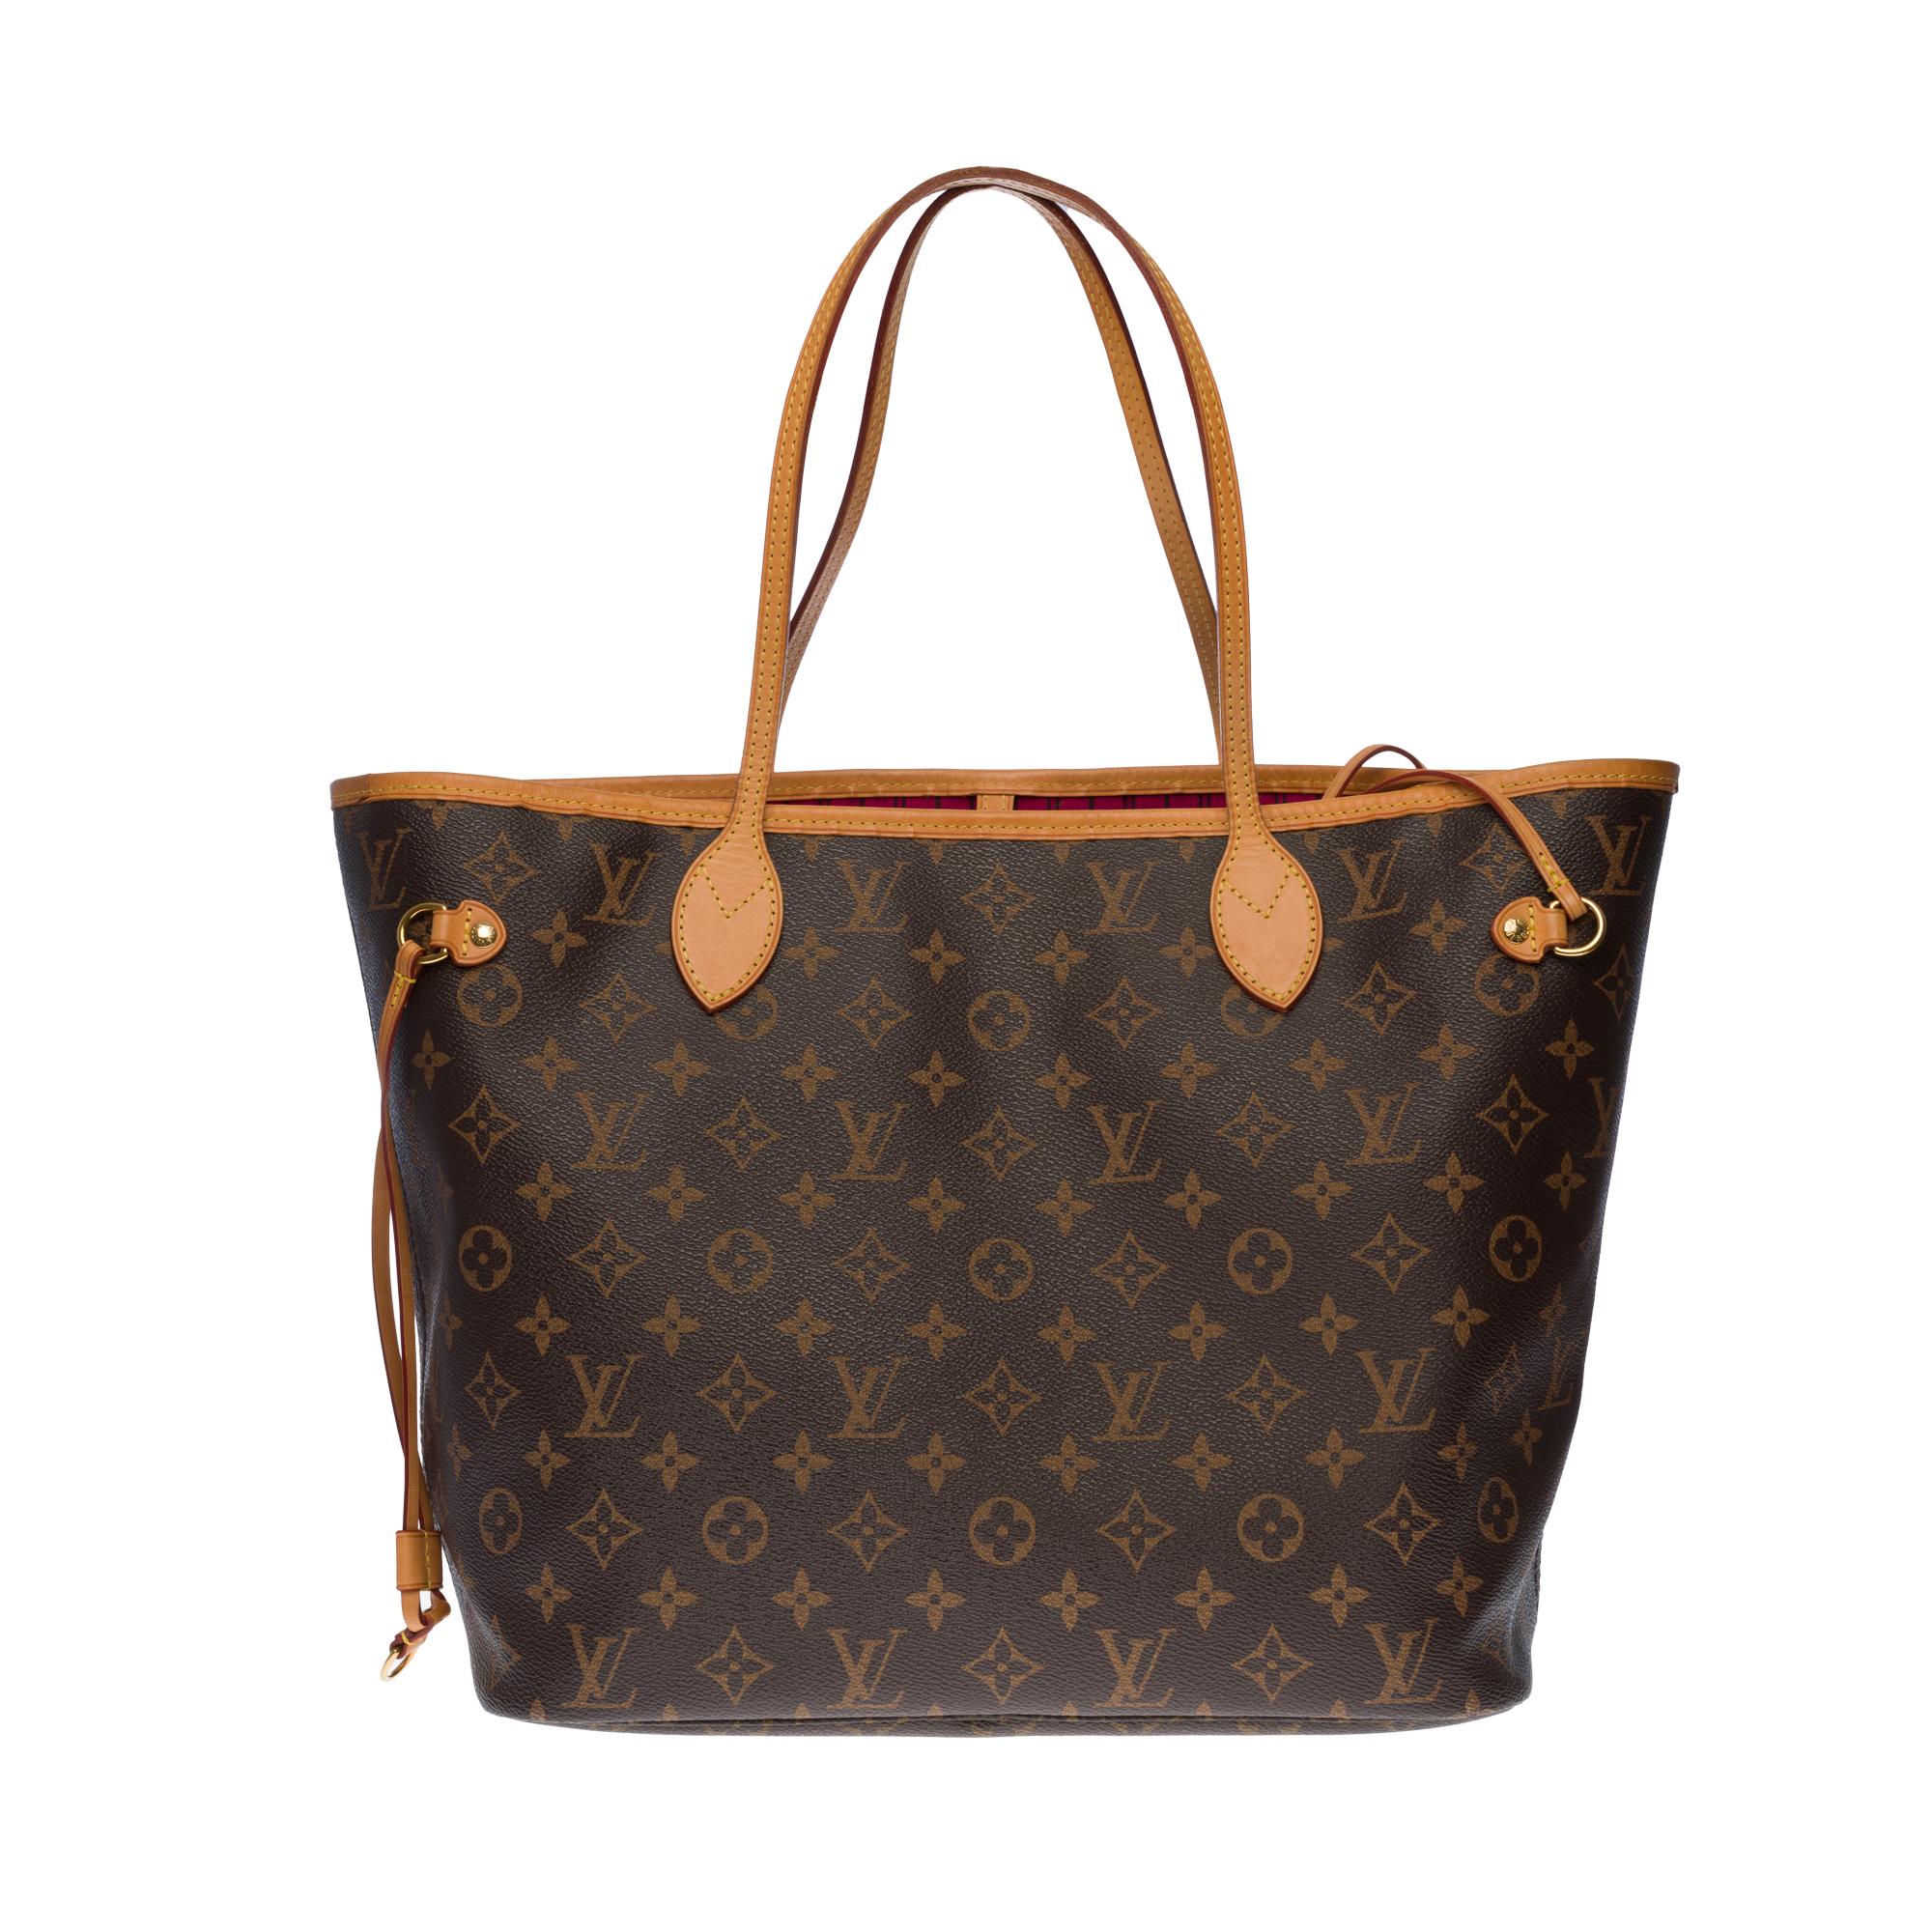 This is a brand-new 2016 LOUIS VUITTON monogram MM size NEVERFULL handbag TOTE, that is a limited edition version 2016 Saint Tropez. 
These Limited Edition Neverfulls can only be purchased at the LOUIS VUITTON location that is listed on the bag and